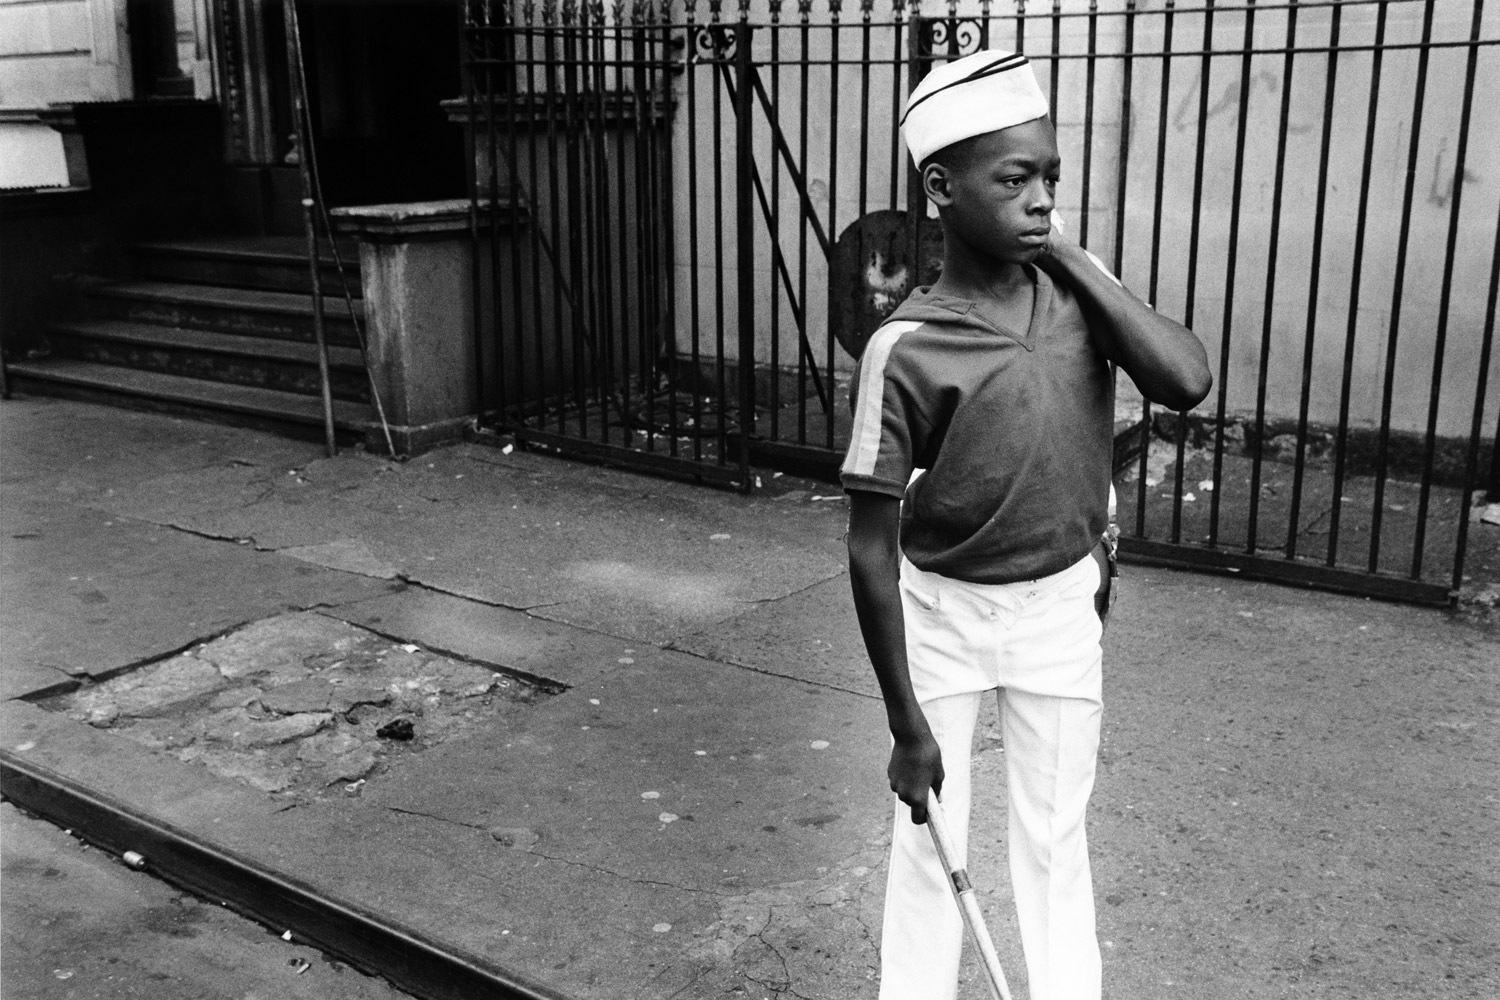 A Young Boy from the Marching Band, Harlem, NY, 1977